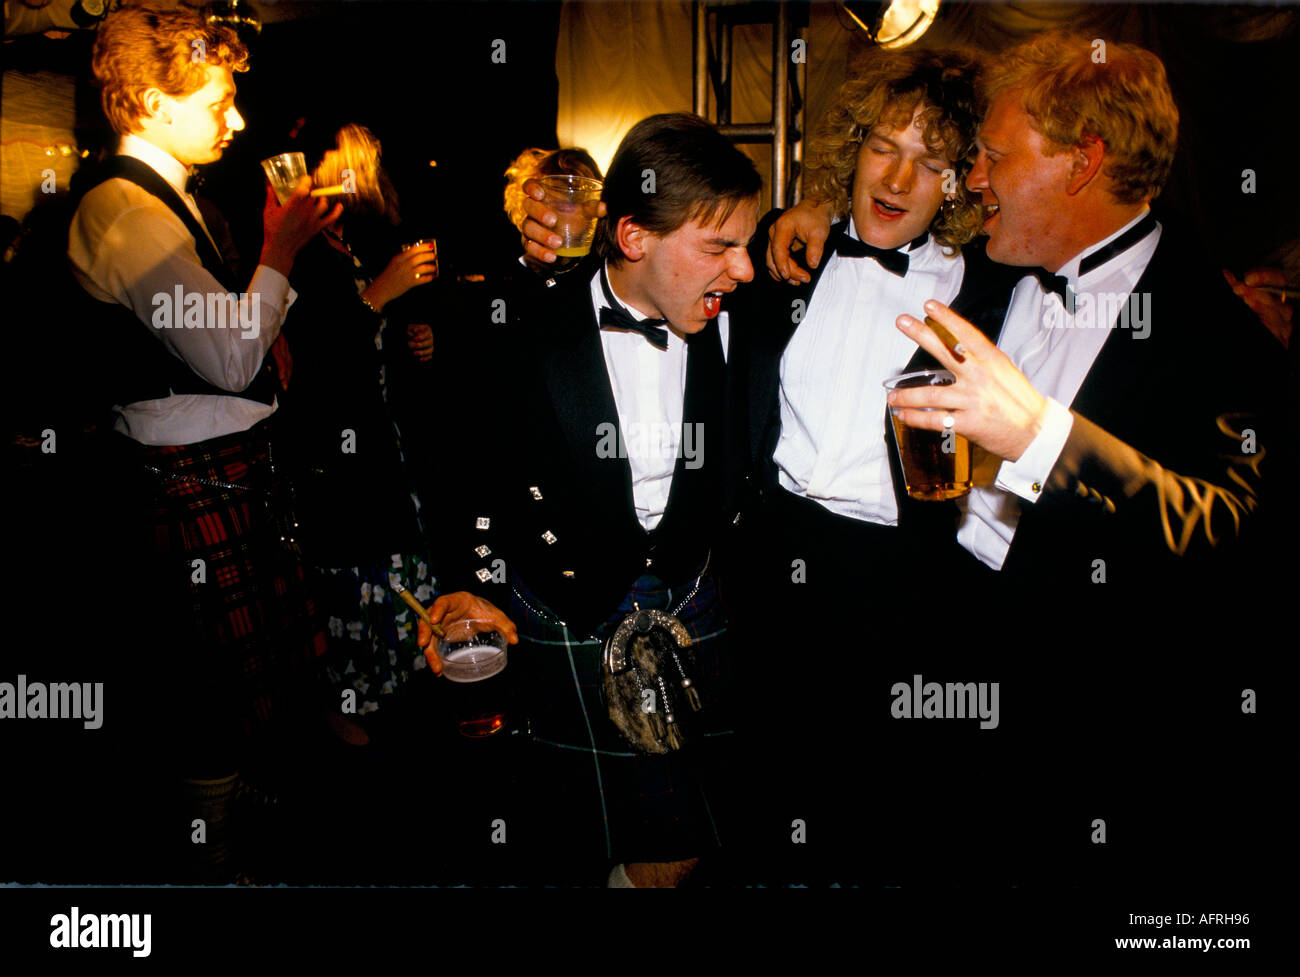 Drunk men students 1990s smoking, drinking, bonding.at annual end of year May Ball, Royal Agricultural College Cirencester UK 1995 HOMER SYKES Stock Photo